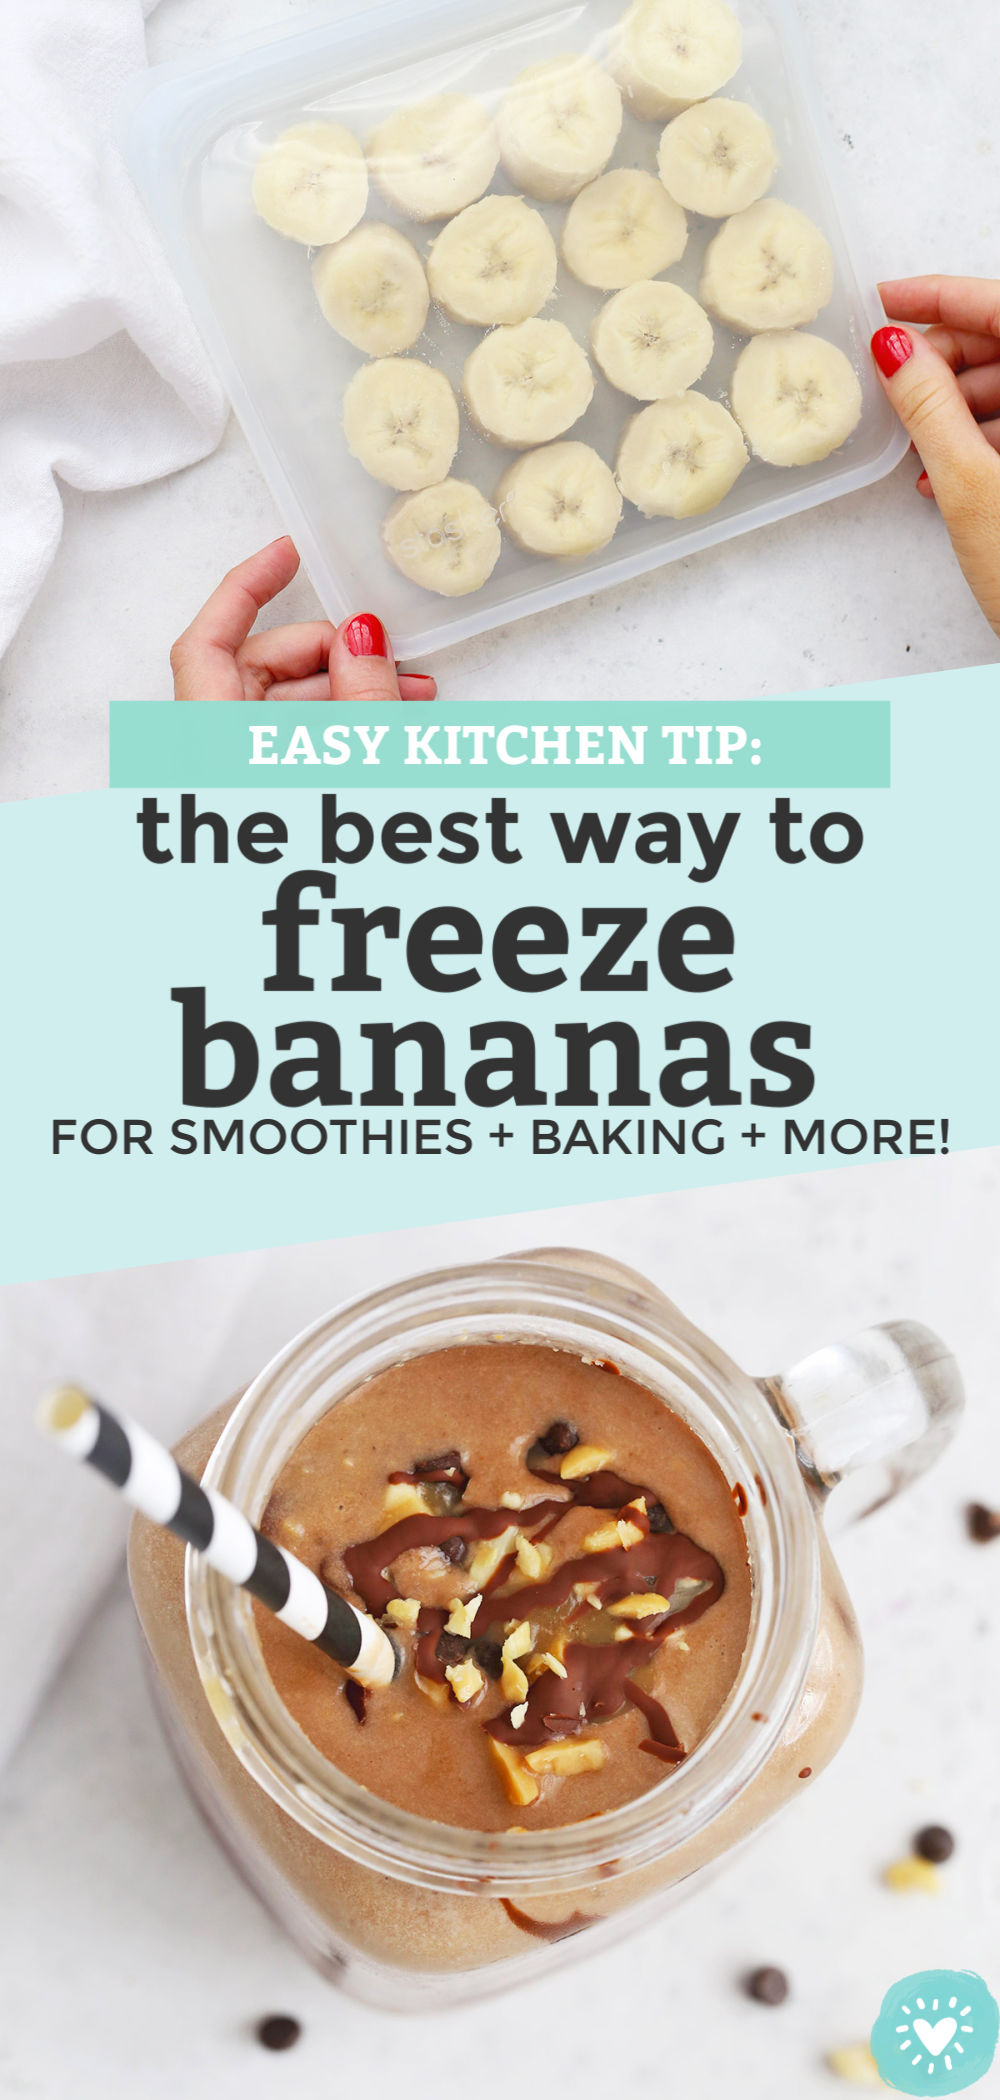 How to Freeze Bananas tutorial from One Lovely Life